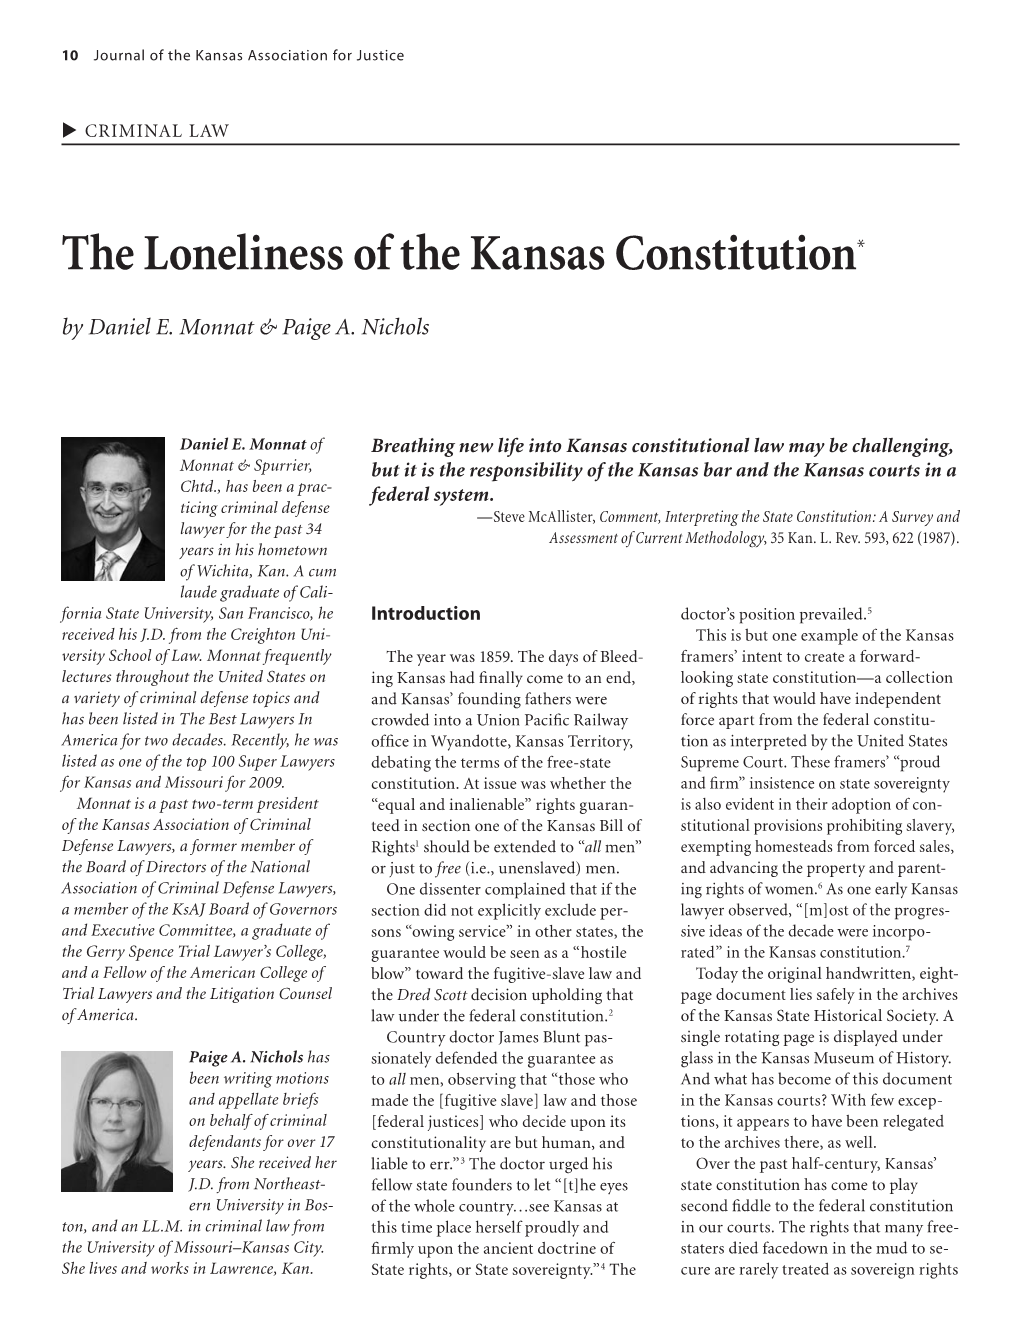 The Loneliness of the Kansas Constitution* by Daniel E